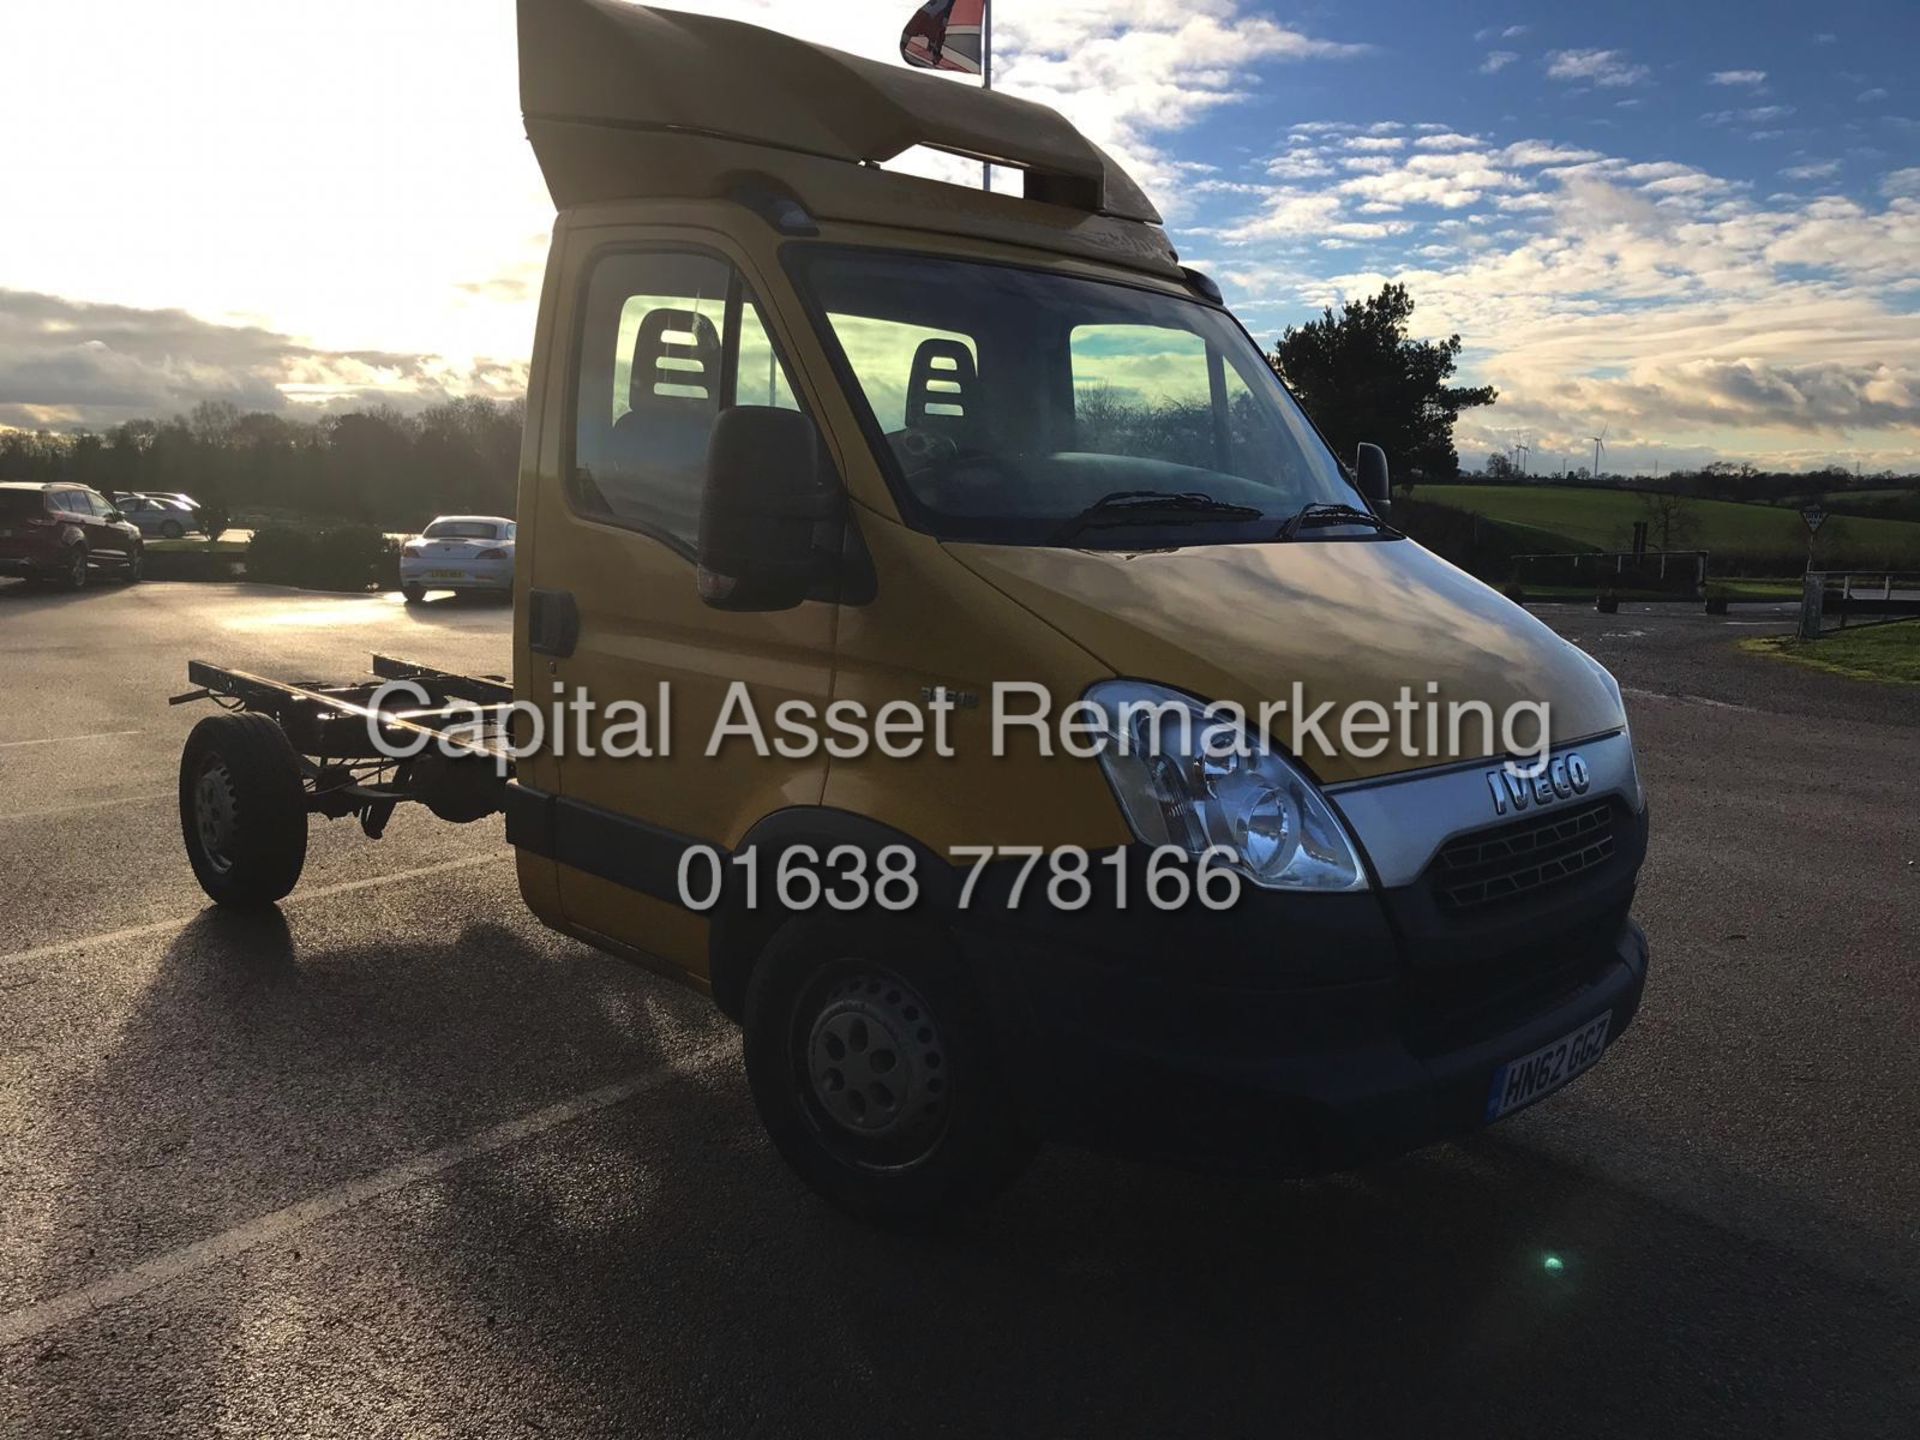 (ON SALE) IVECO DAILY 35S13 - CHASSIS CAB - NEW SHAPE - 2013 MODEL - LONG MOT - IDEAL RECOVERY TRUCK - Image 10 of 11